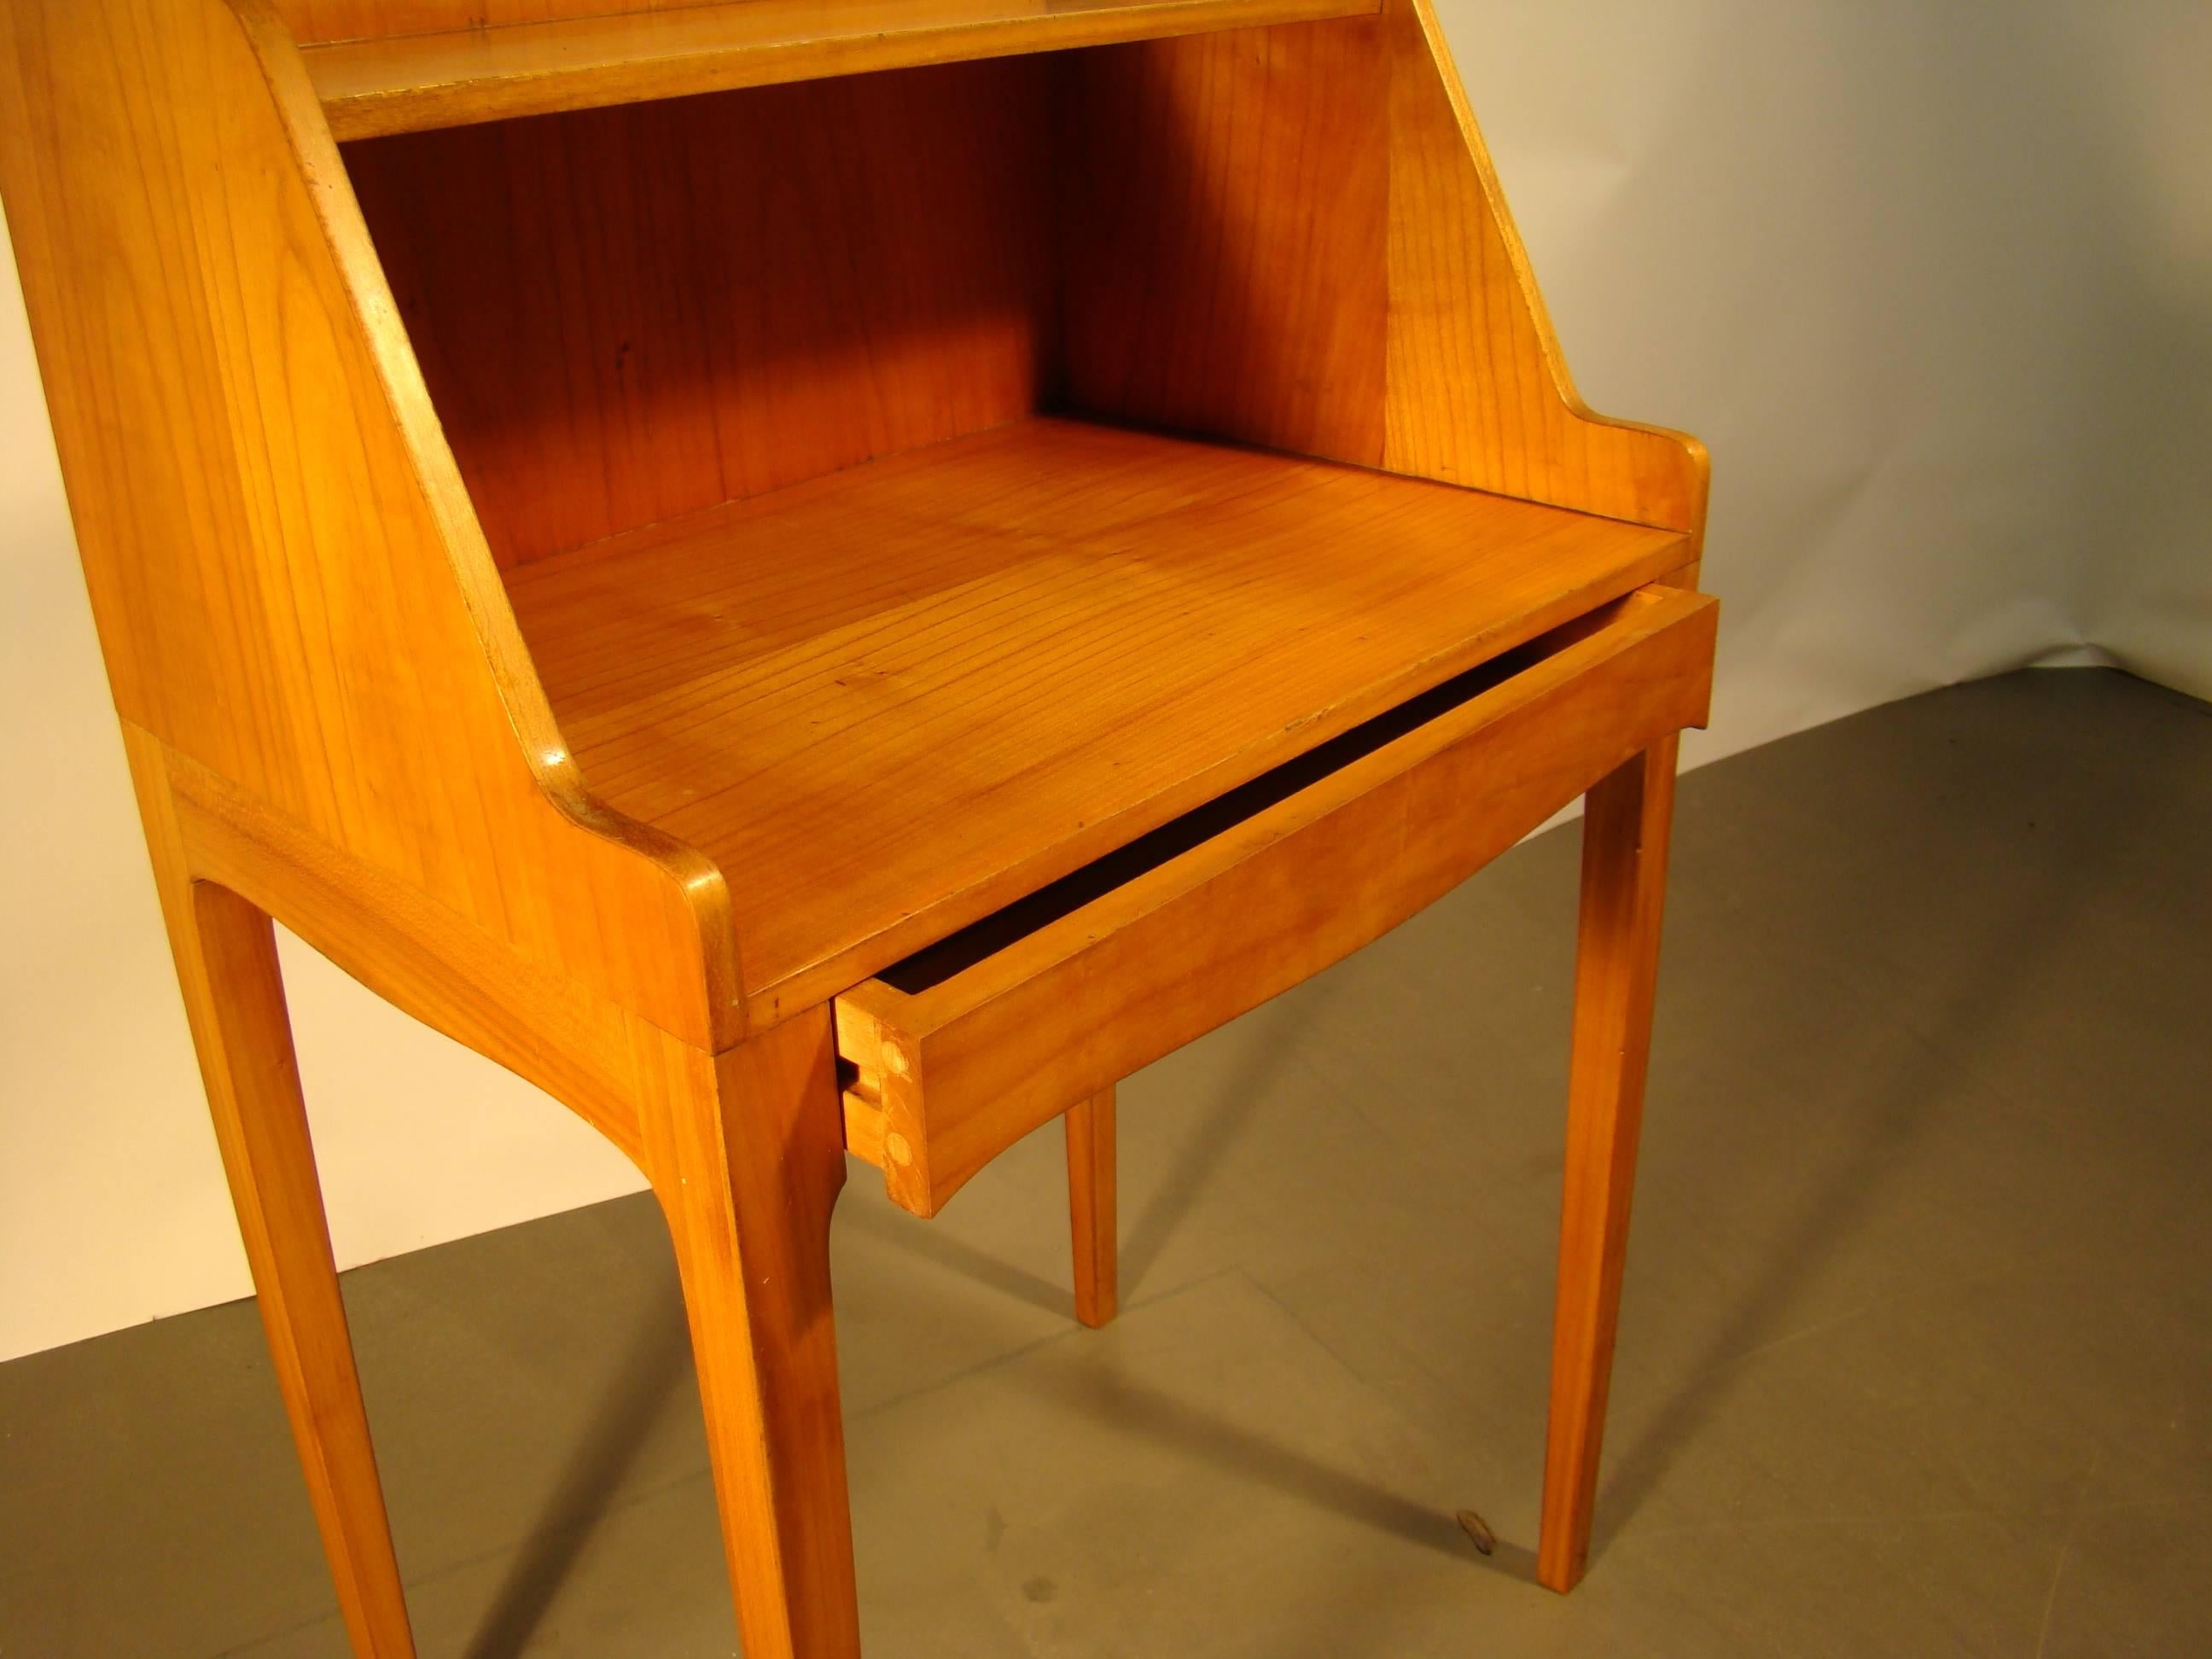 Mid-Century Modern Italian Work Side Table in Solid and Veneer Cherry Wood, circa 1940-1950 For Sale